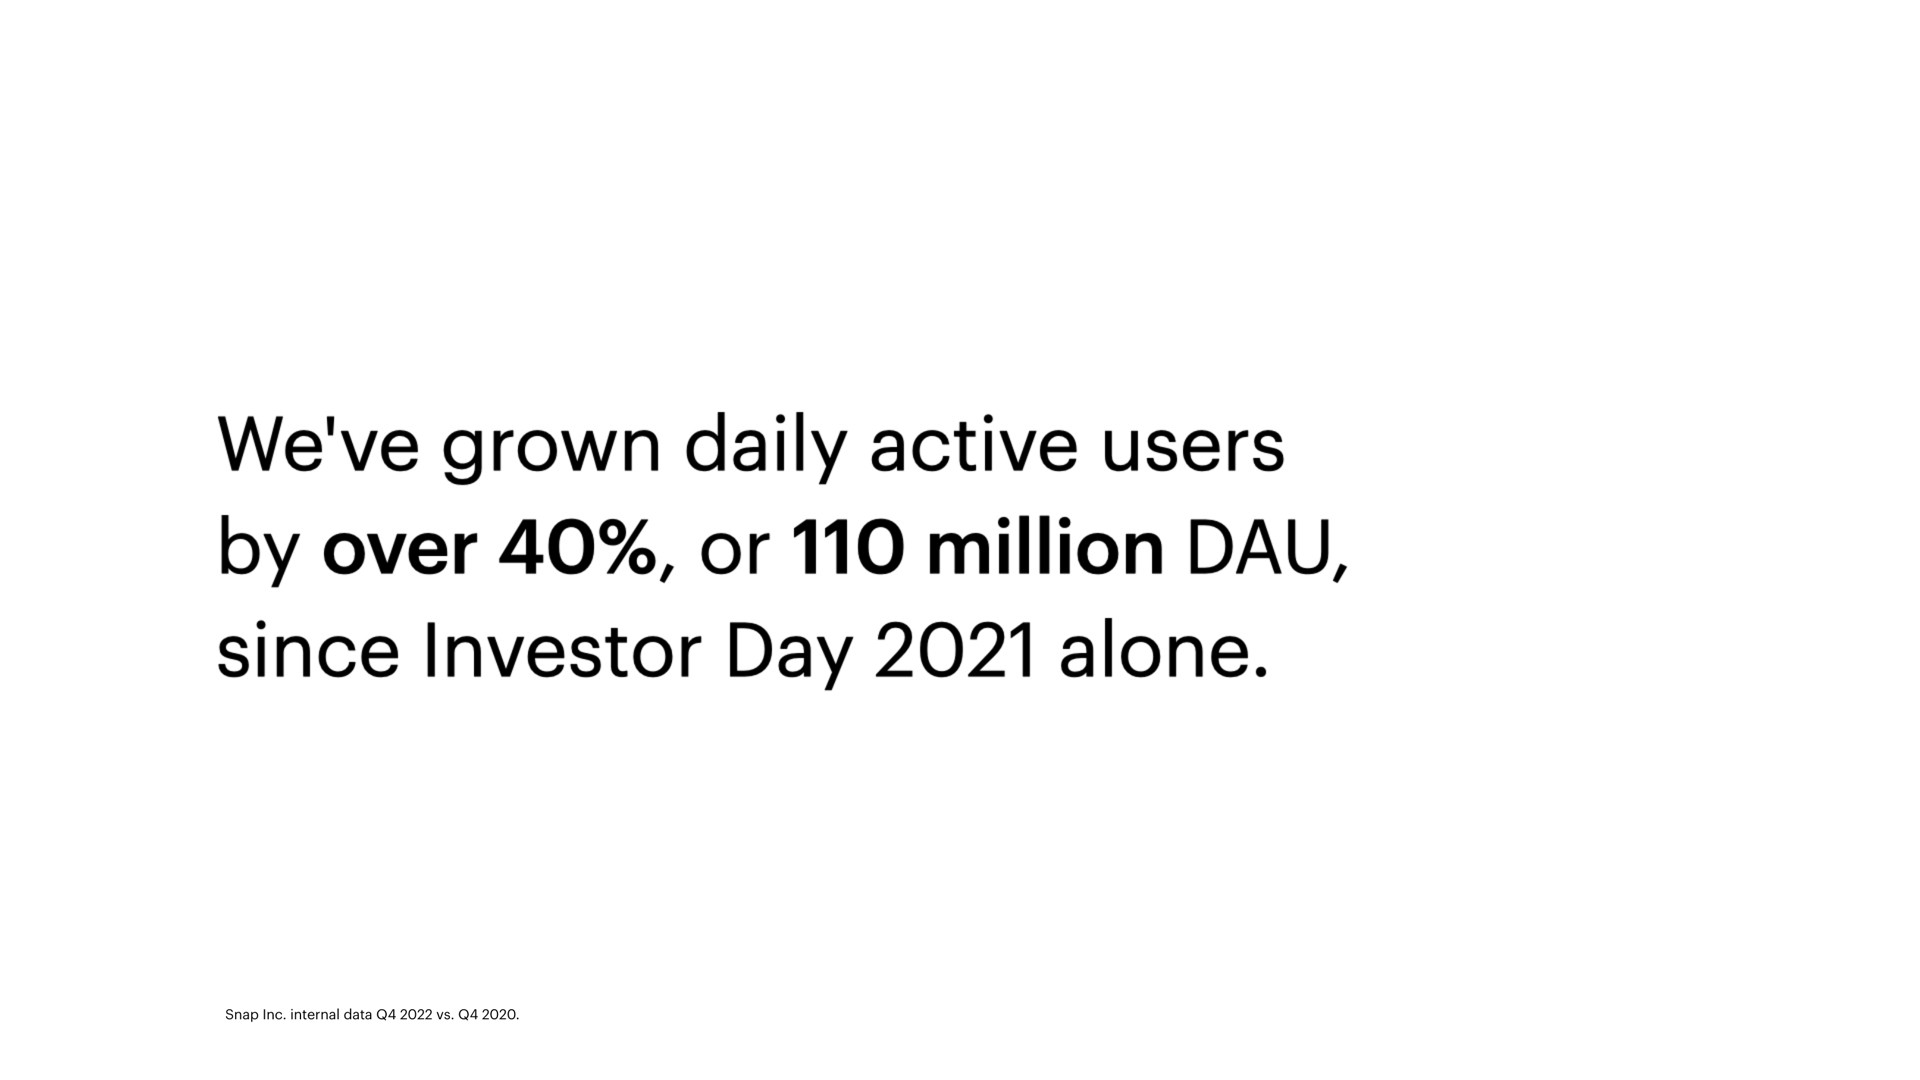 we grown daily active users by over or million since investor day alone | Snap Inc